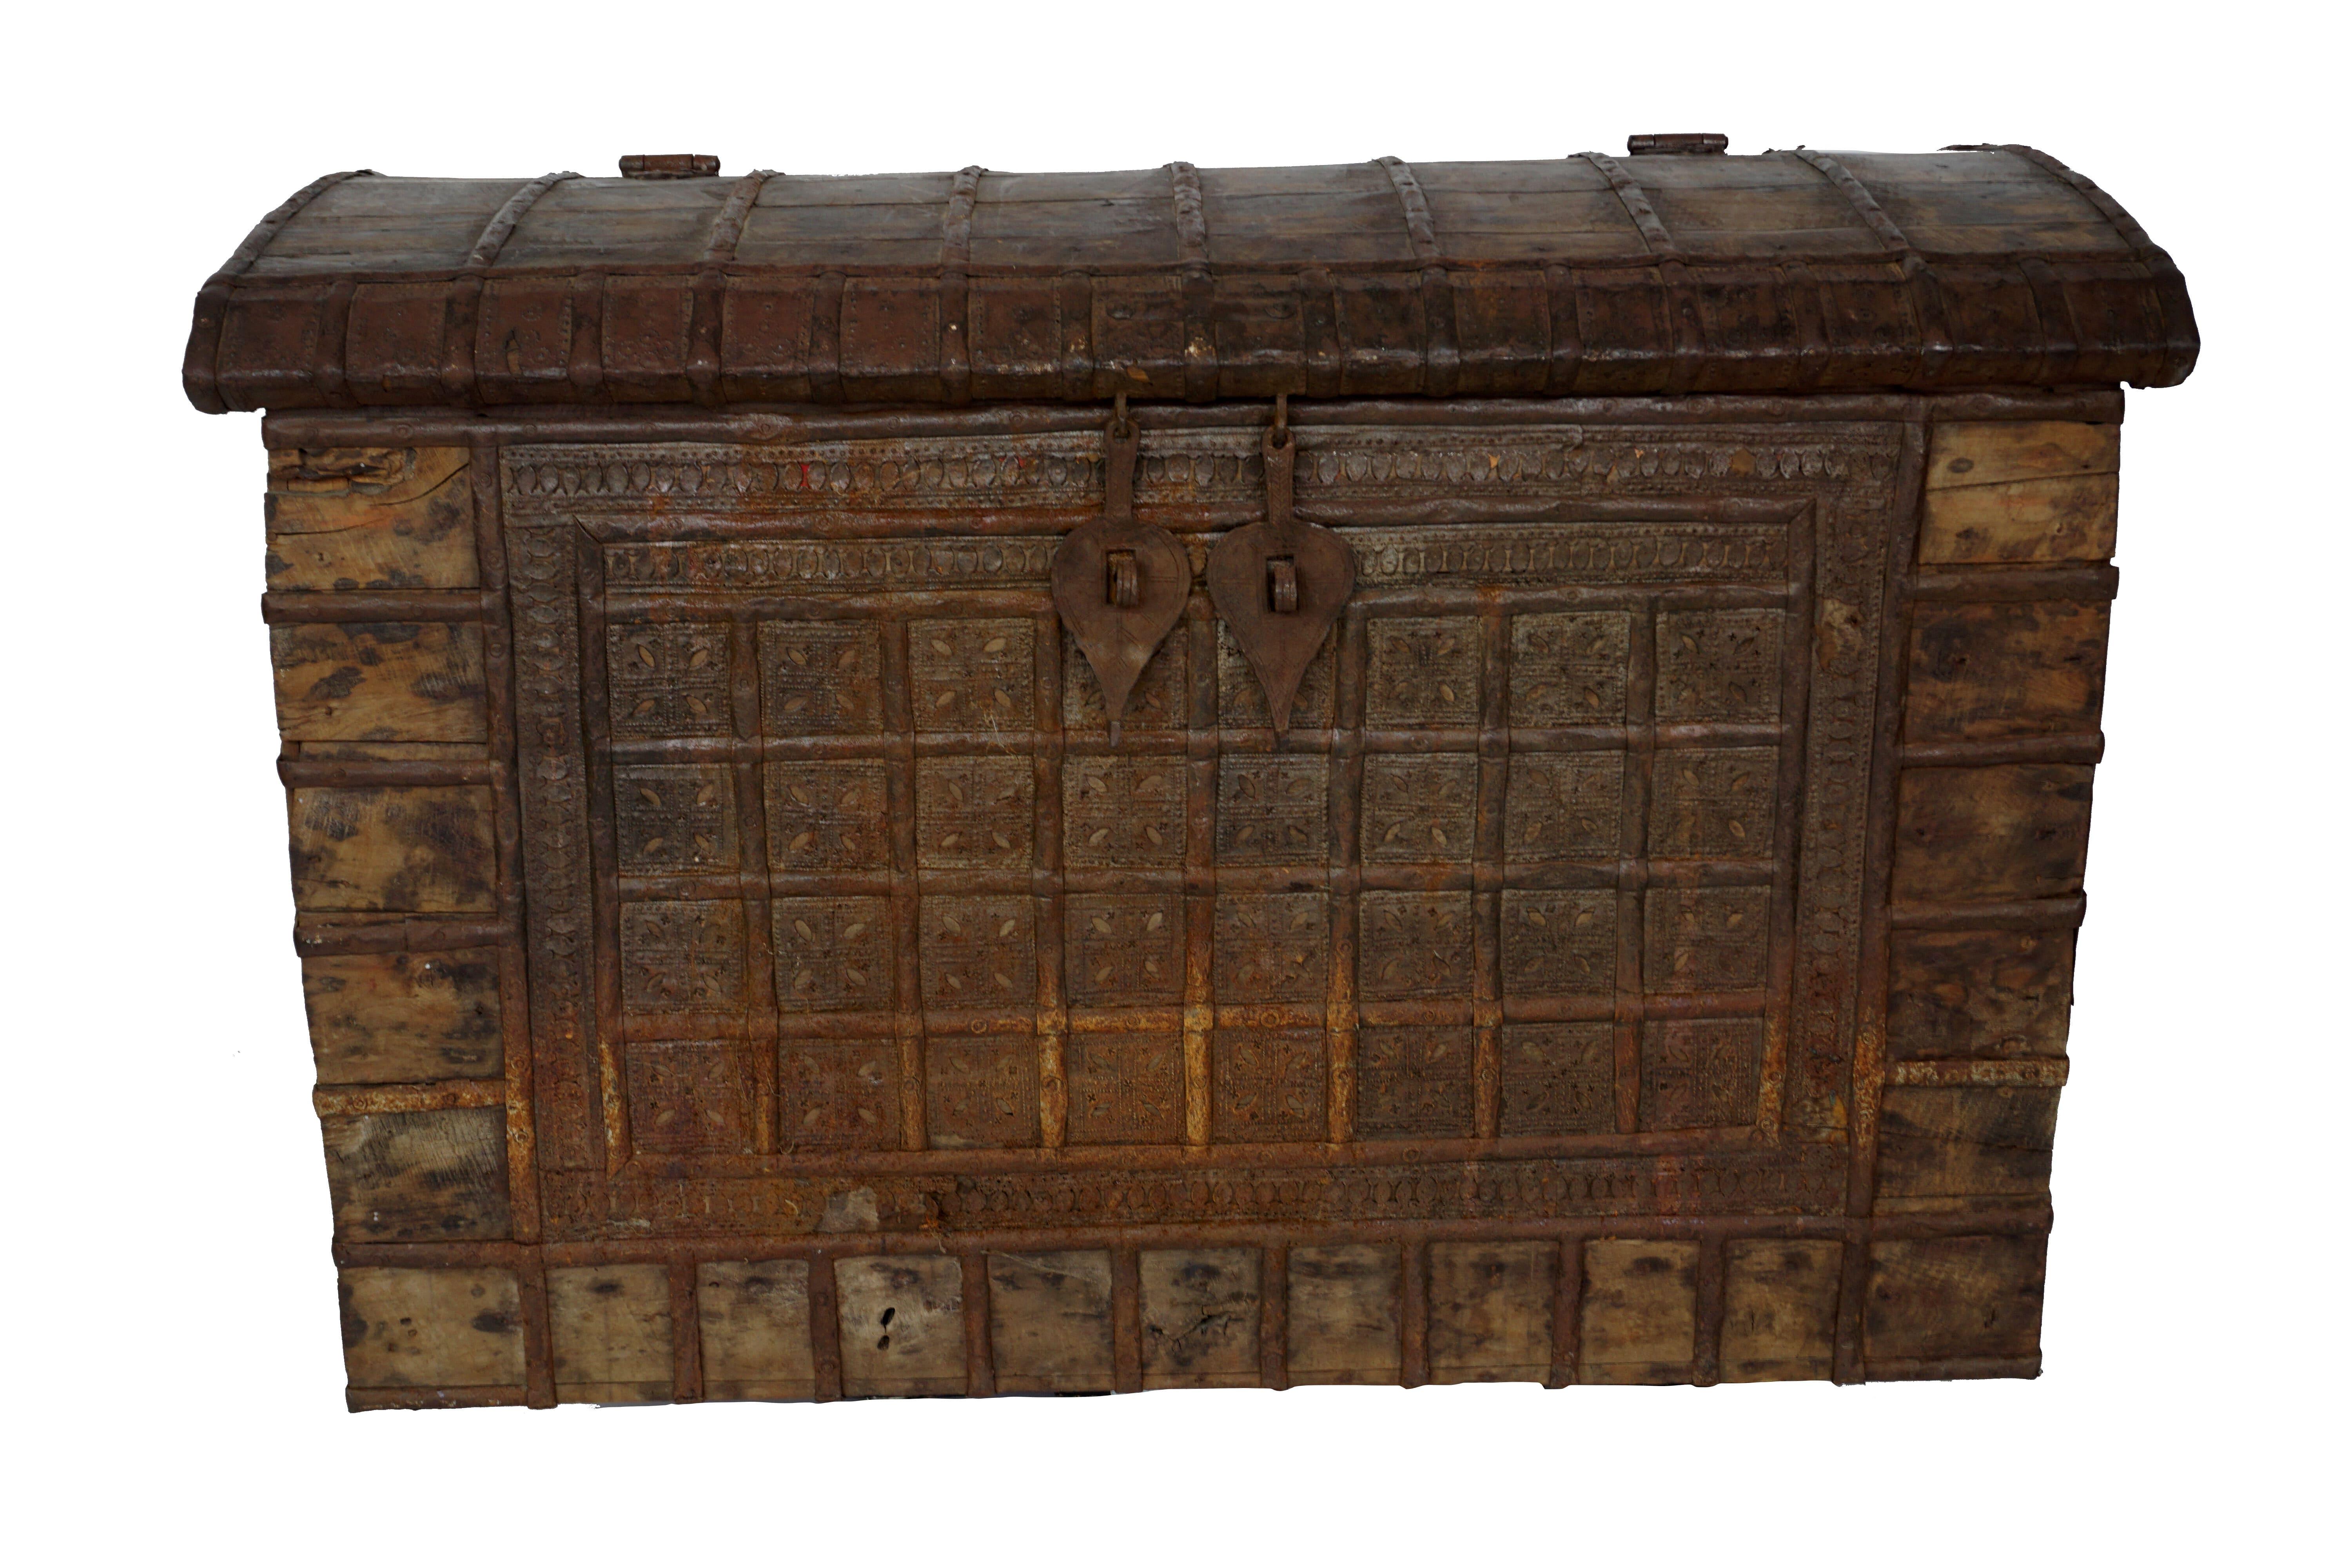 Beautiful 19th century, Anglo-Indian solid teak trunk with original iron bindings.
It has a hinged top with two iron hasps that would have been pinned close with an iron or steel pin. The whole is raised on four square feet. 
This iron-bound box